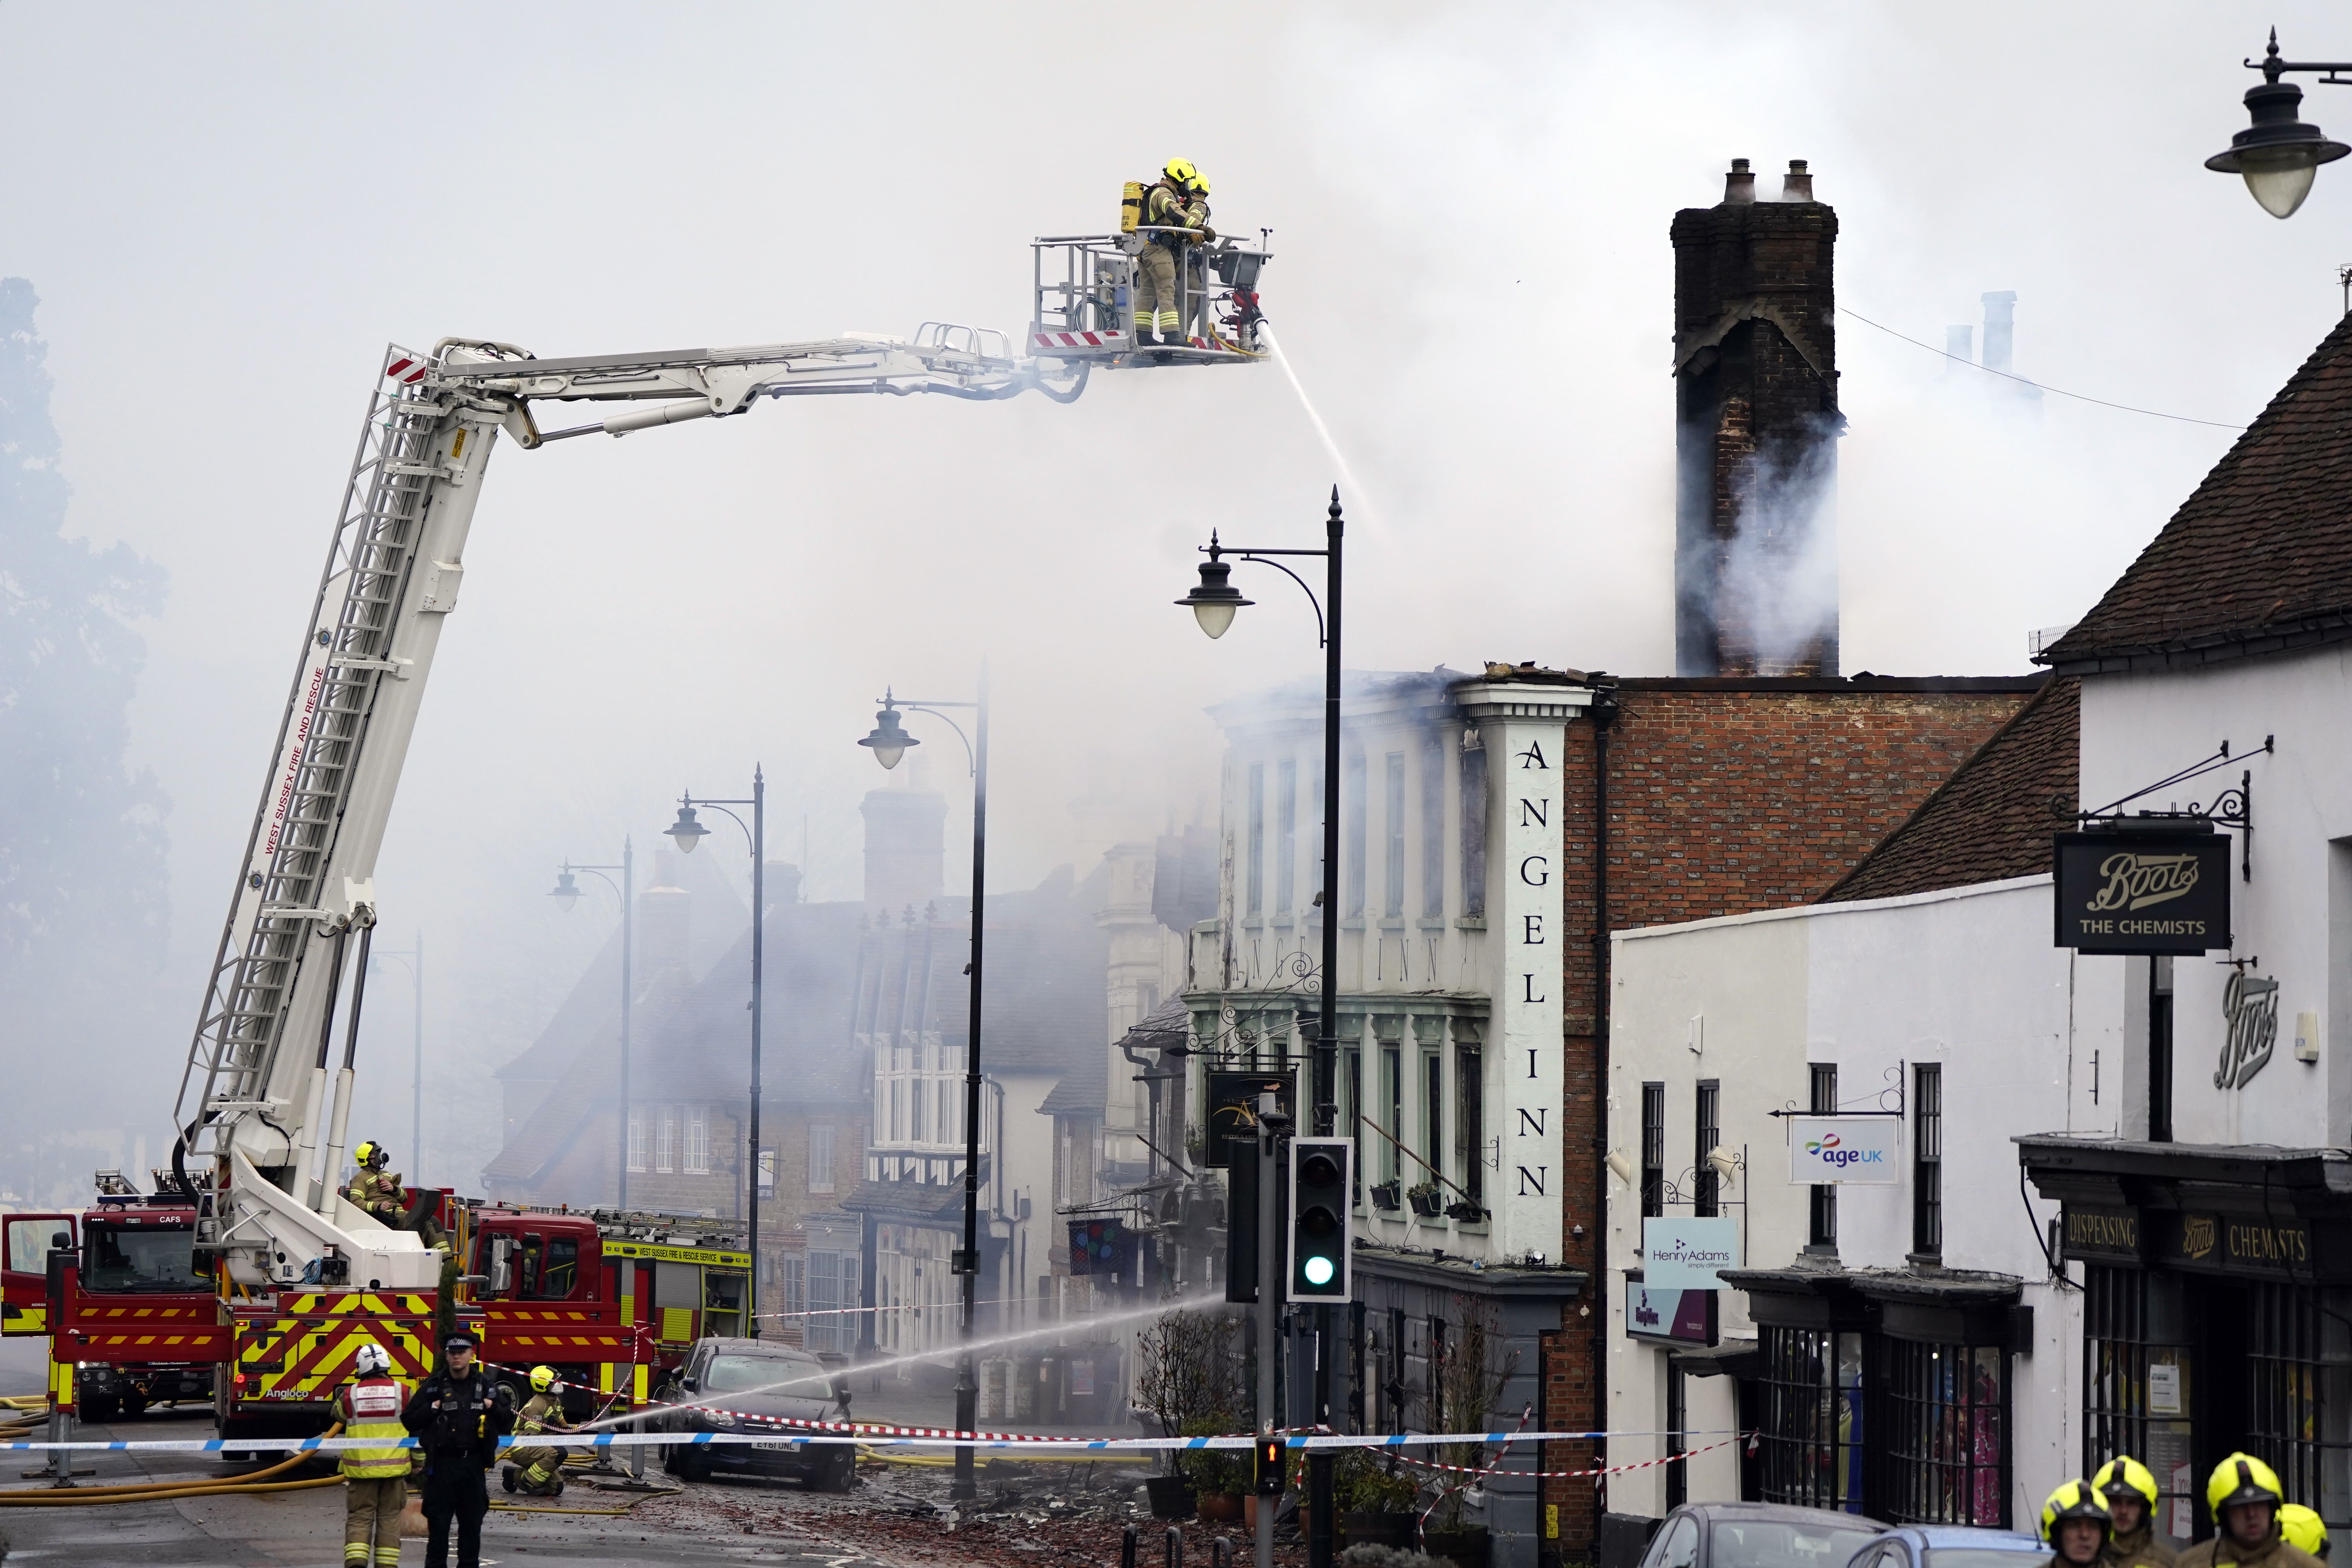 No-one was injured in the late night fire